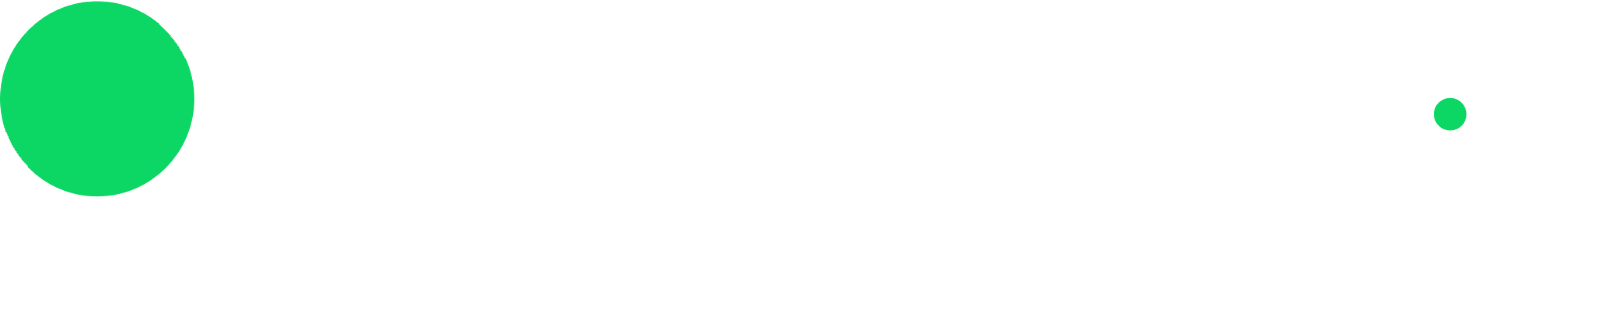 Learn more about Sportsbet from our articcle.